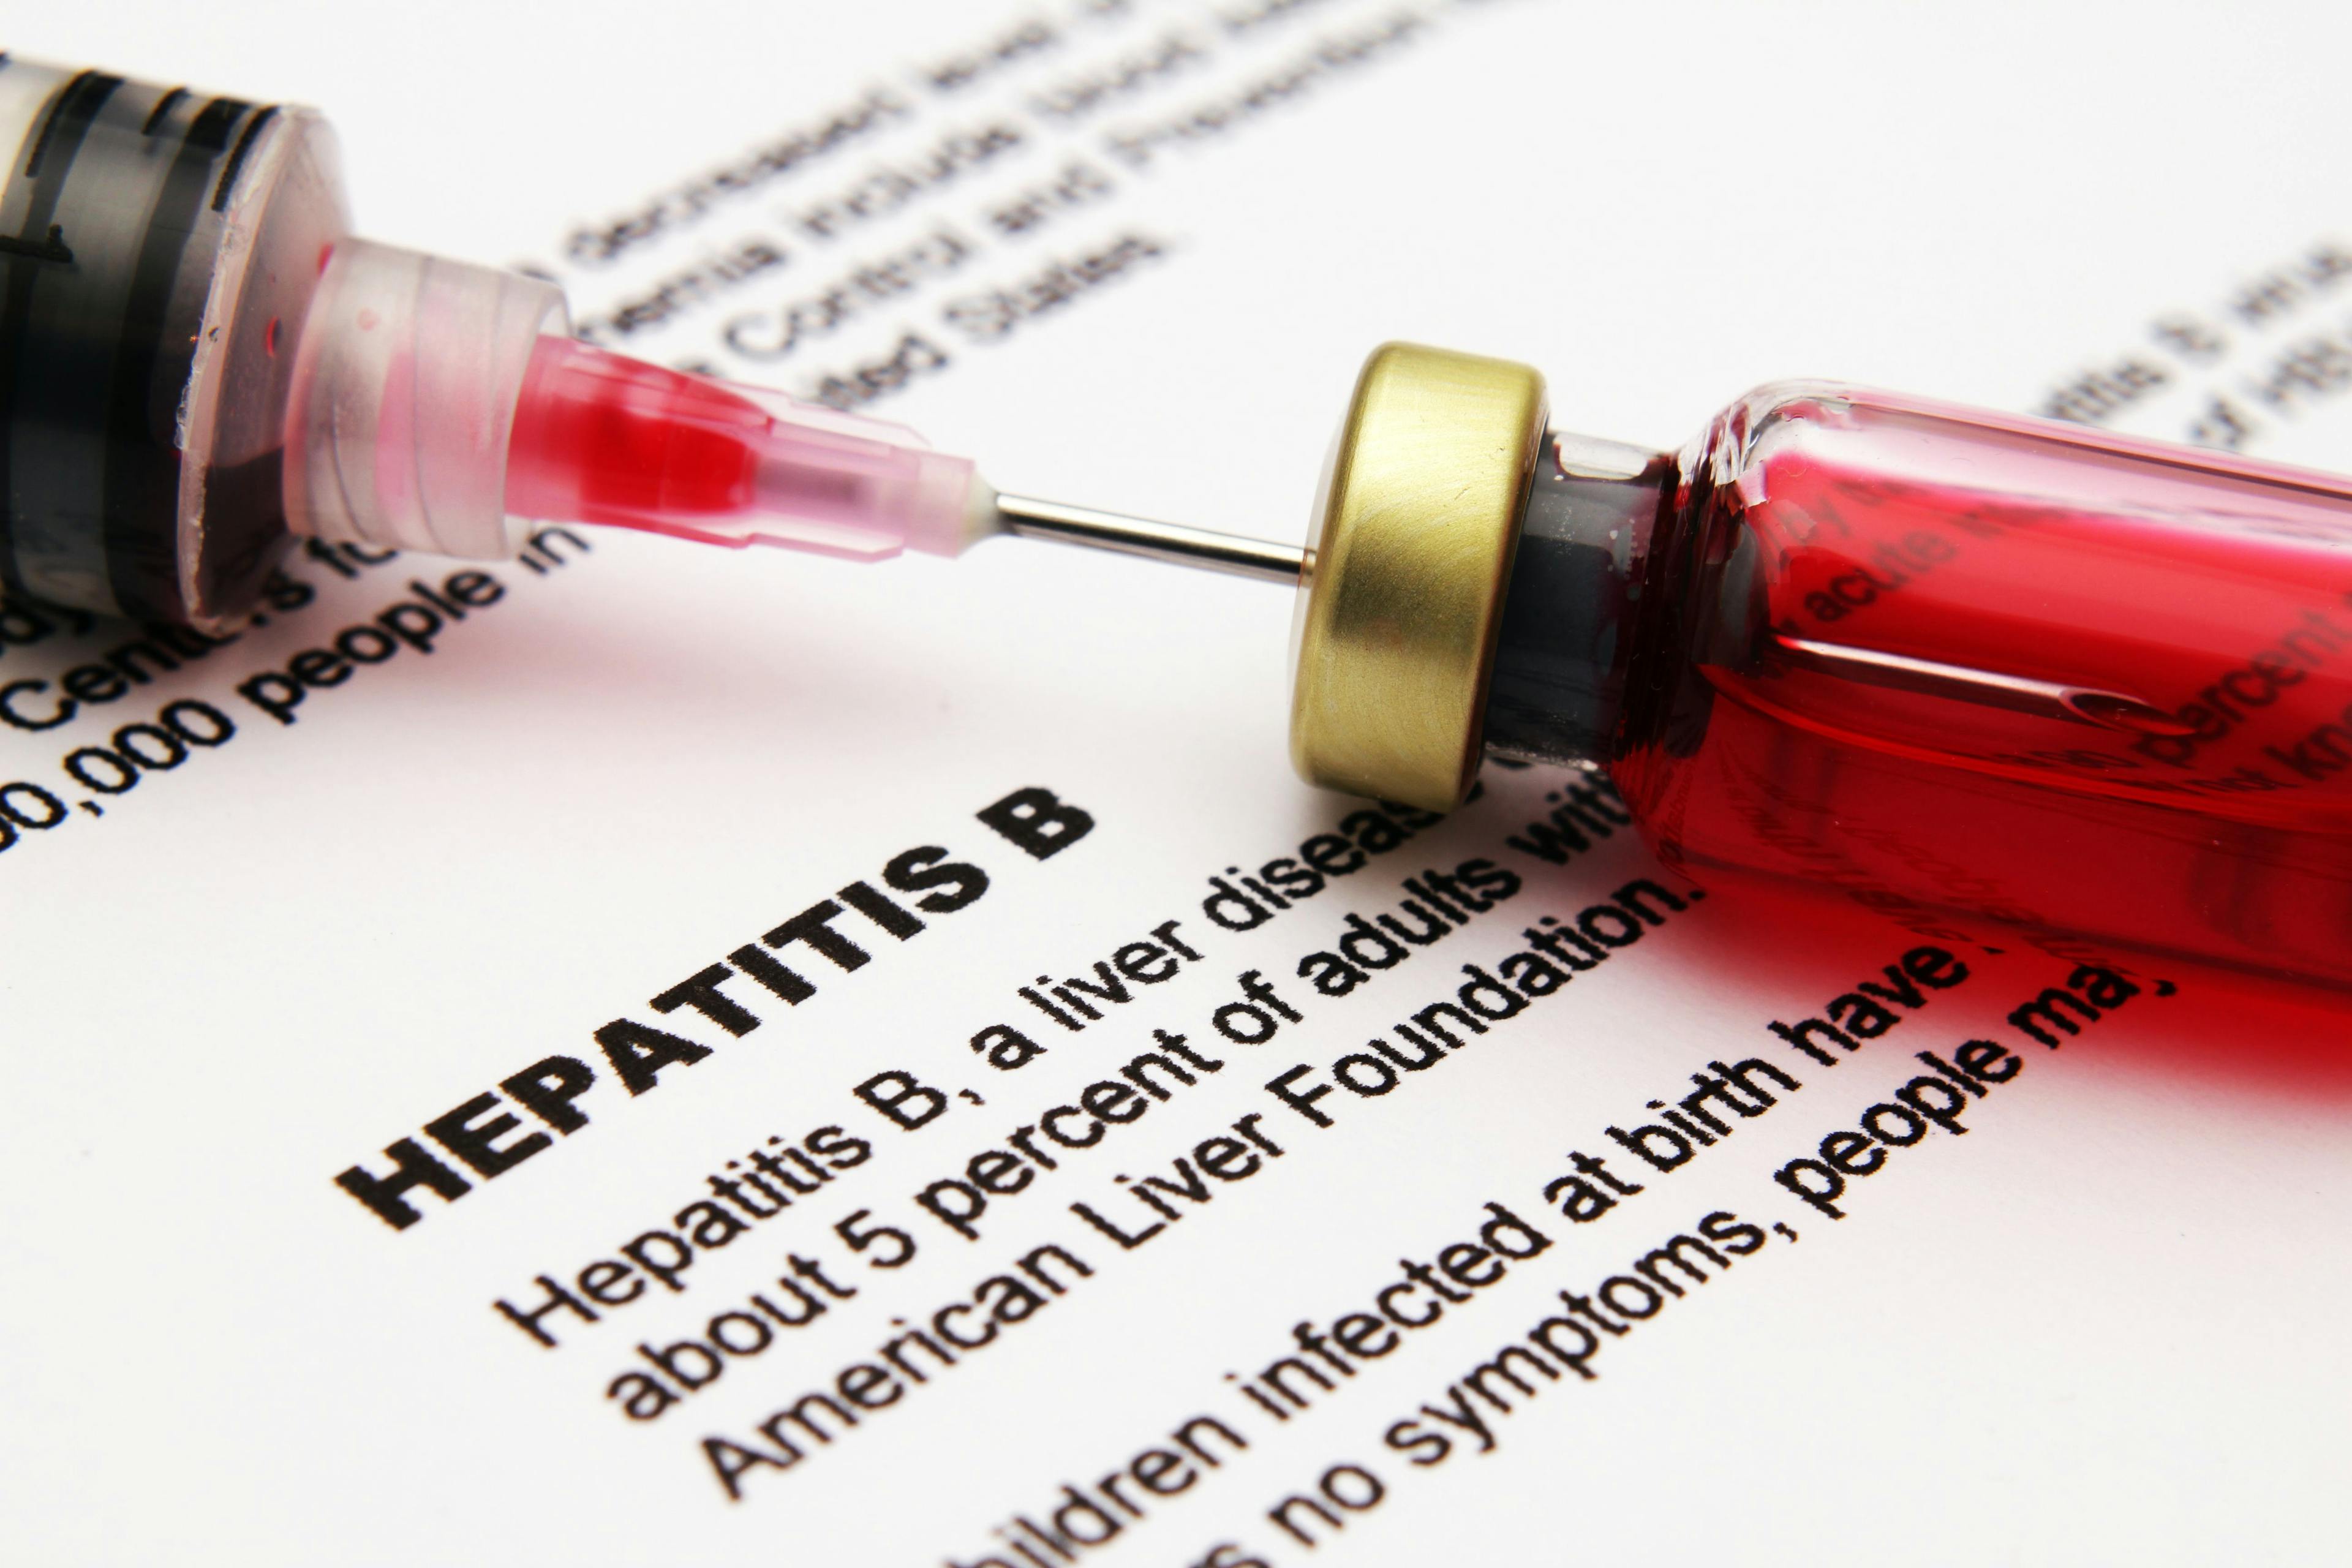 Some chronic hepatitis B patients experienced a dramatic decrease in hepatitis B surface antigen (HBsAg) after receiving a COVID-19 vaccine. Could there be a correlation? 